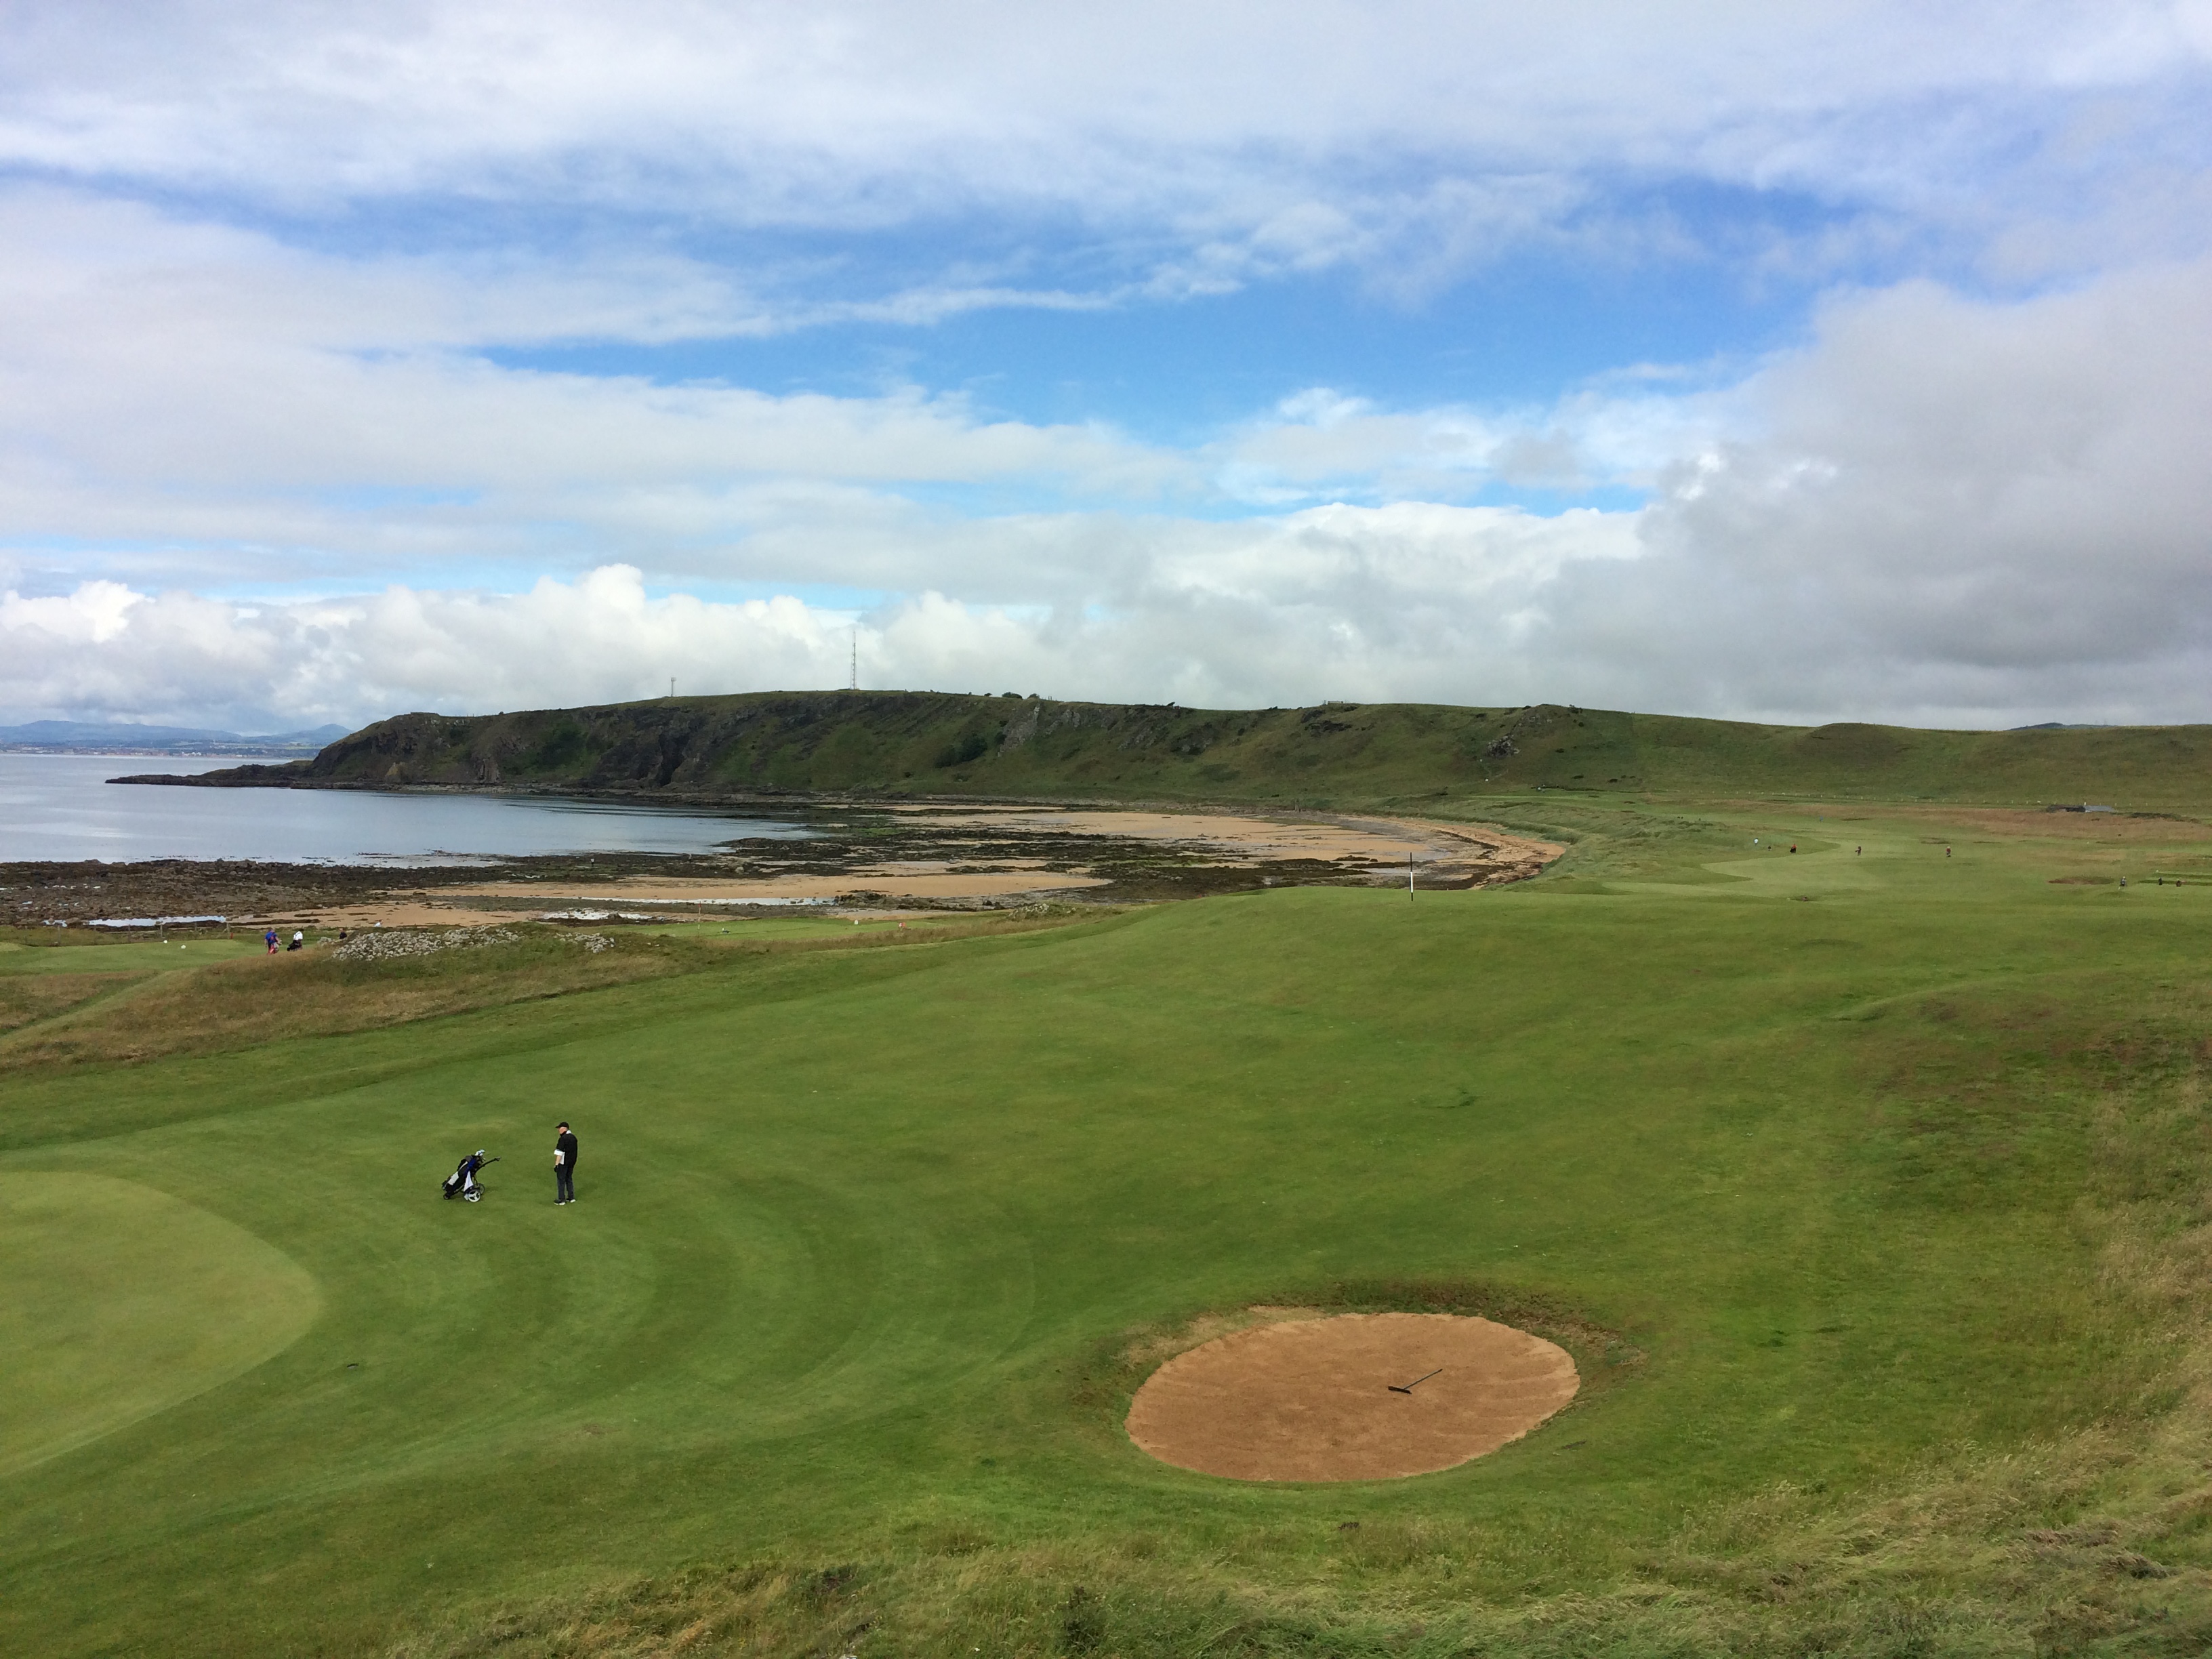 Elie's 10th hole features a blind drive over the brow of a hill